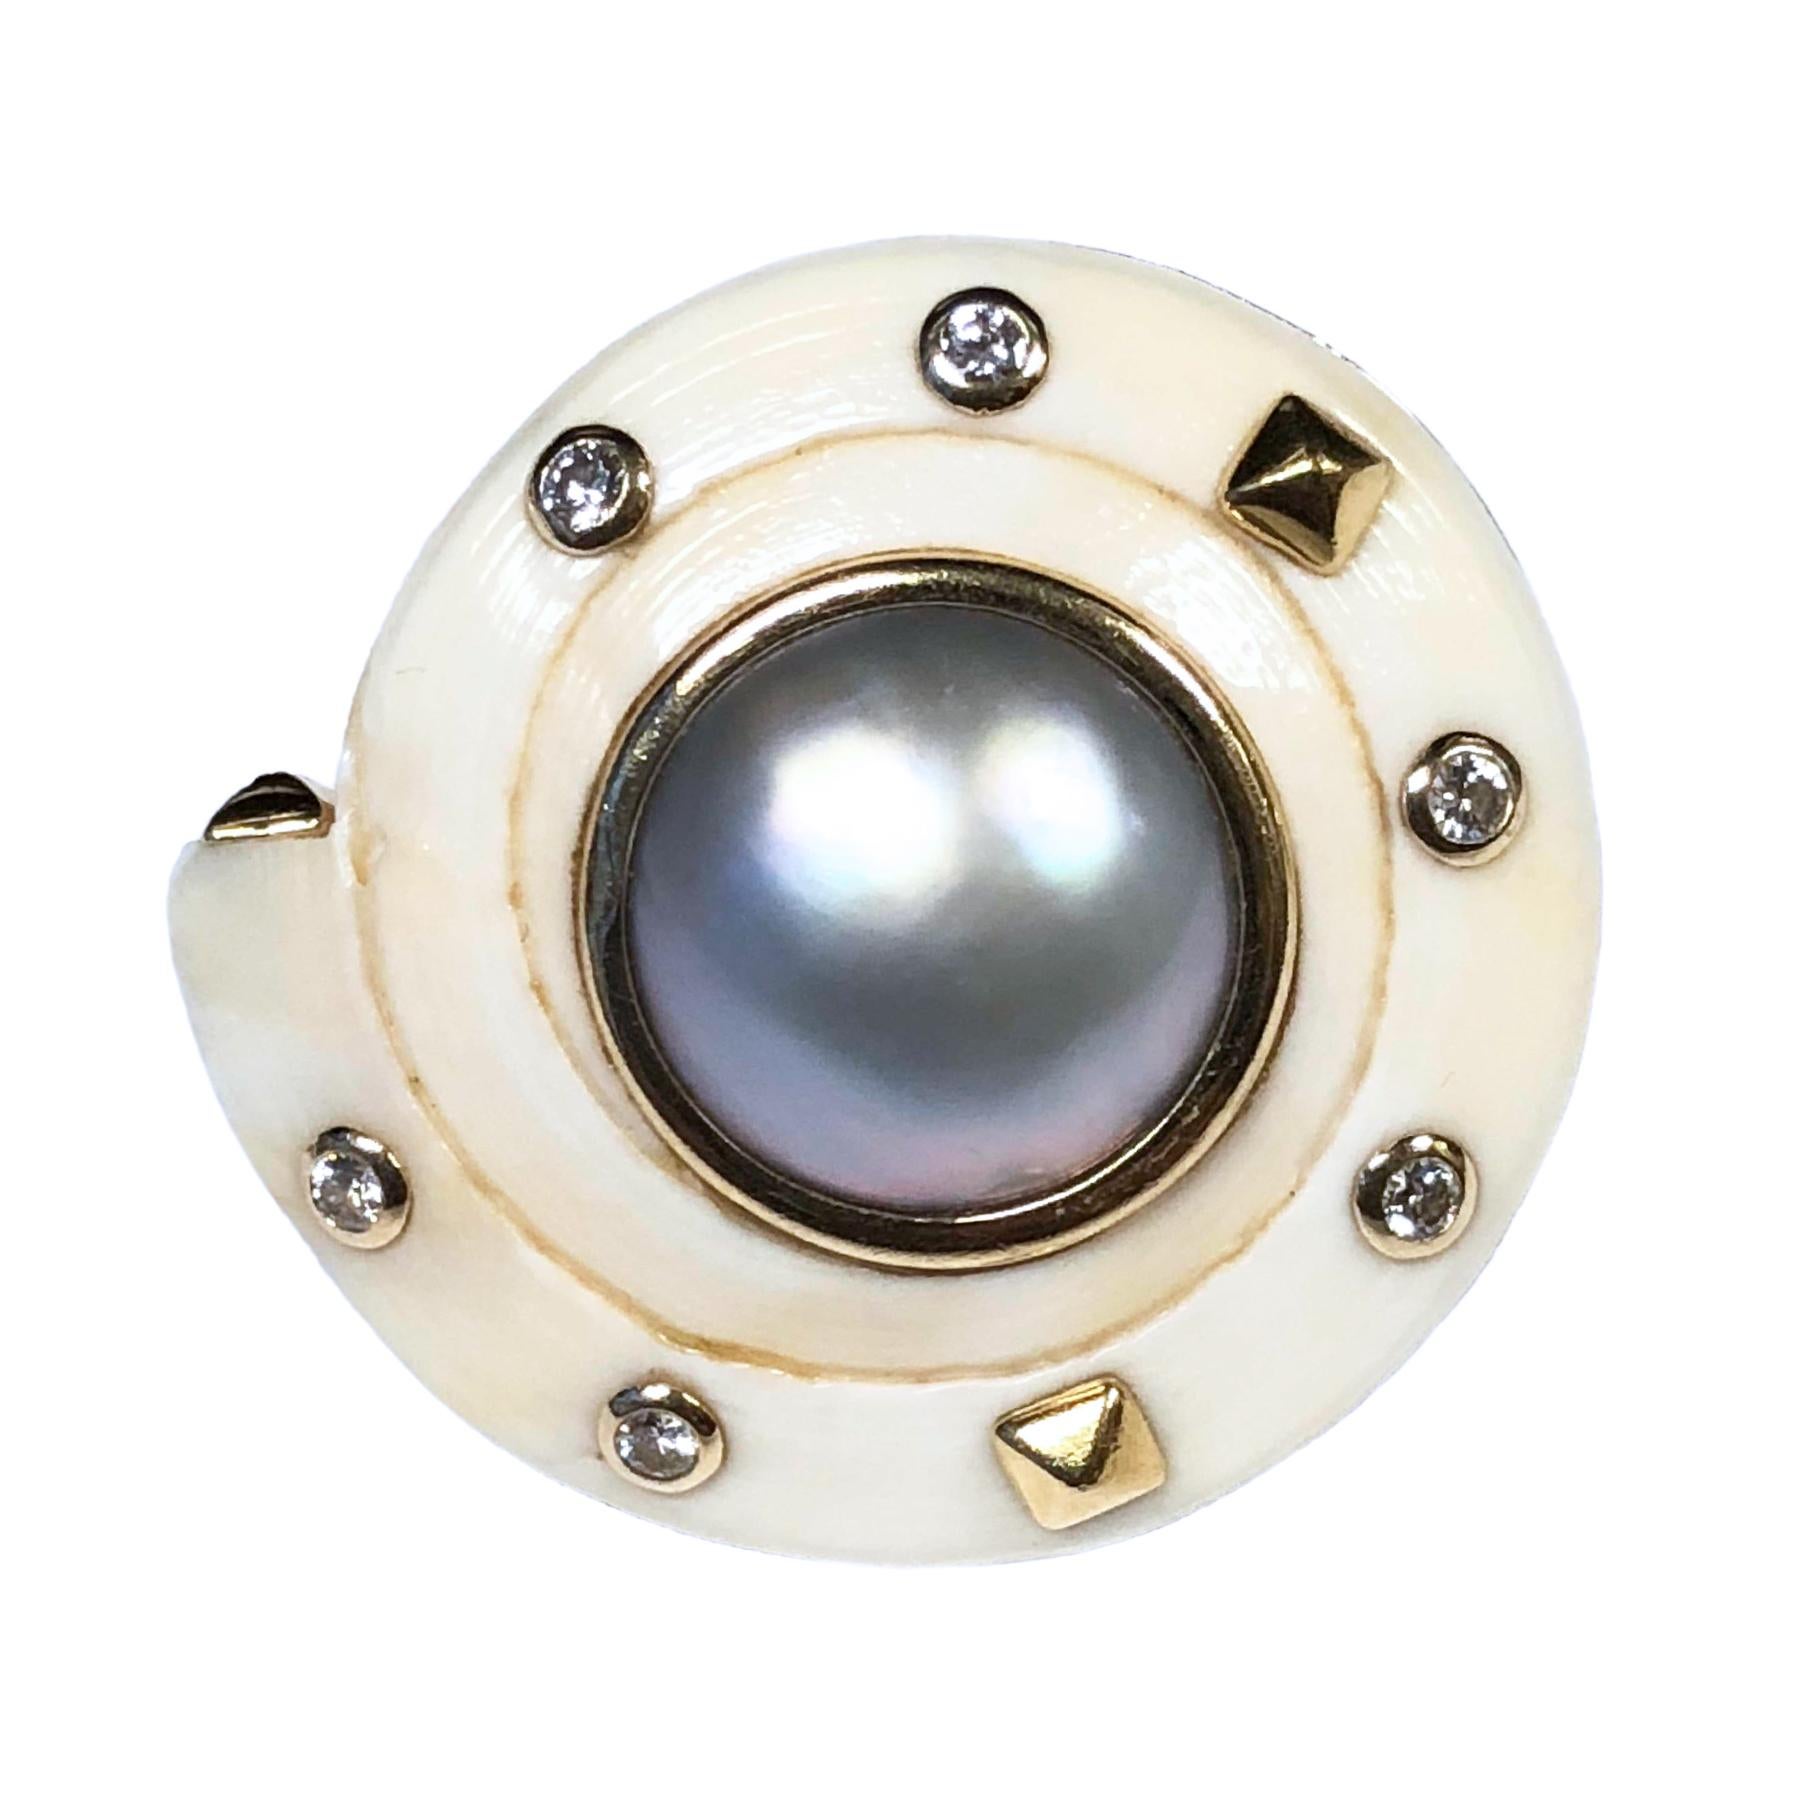 Circa 1970s 14K Yellow Gold and White Coral Earrings in a Nautical shell design, measuring 1 1/4 inches in diameter, centrally set with a 12 MM Grey Mabe pearl and further set with Round Brilliant cut Diamonds totaling 1/2 Carat. Omega Clip backs to